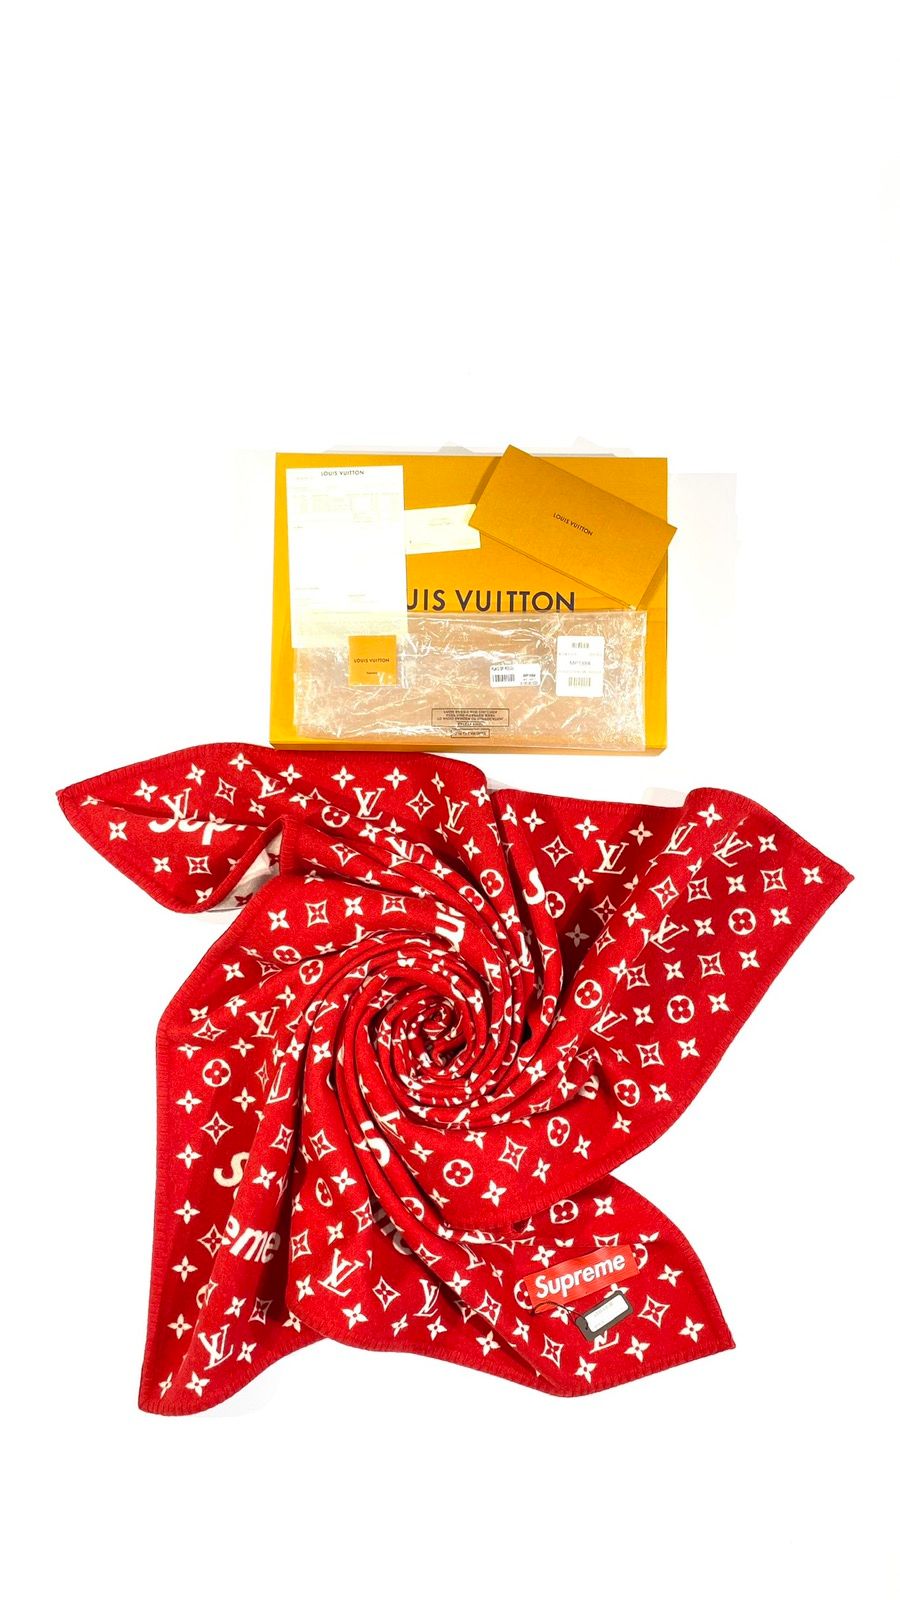 LOUIS VUITTON Red Monogram Blanket LV Box Logo Limited Edition Supreme  MP1884｜Product Code：2108300058337｜BRAND OFF Online Store